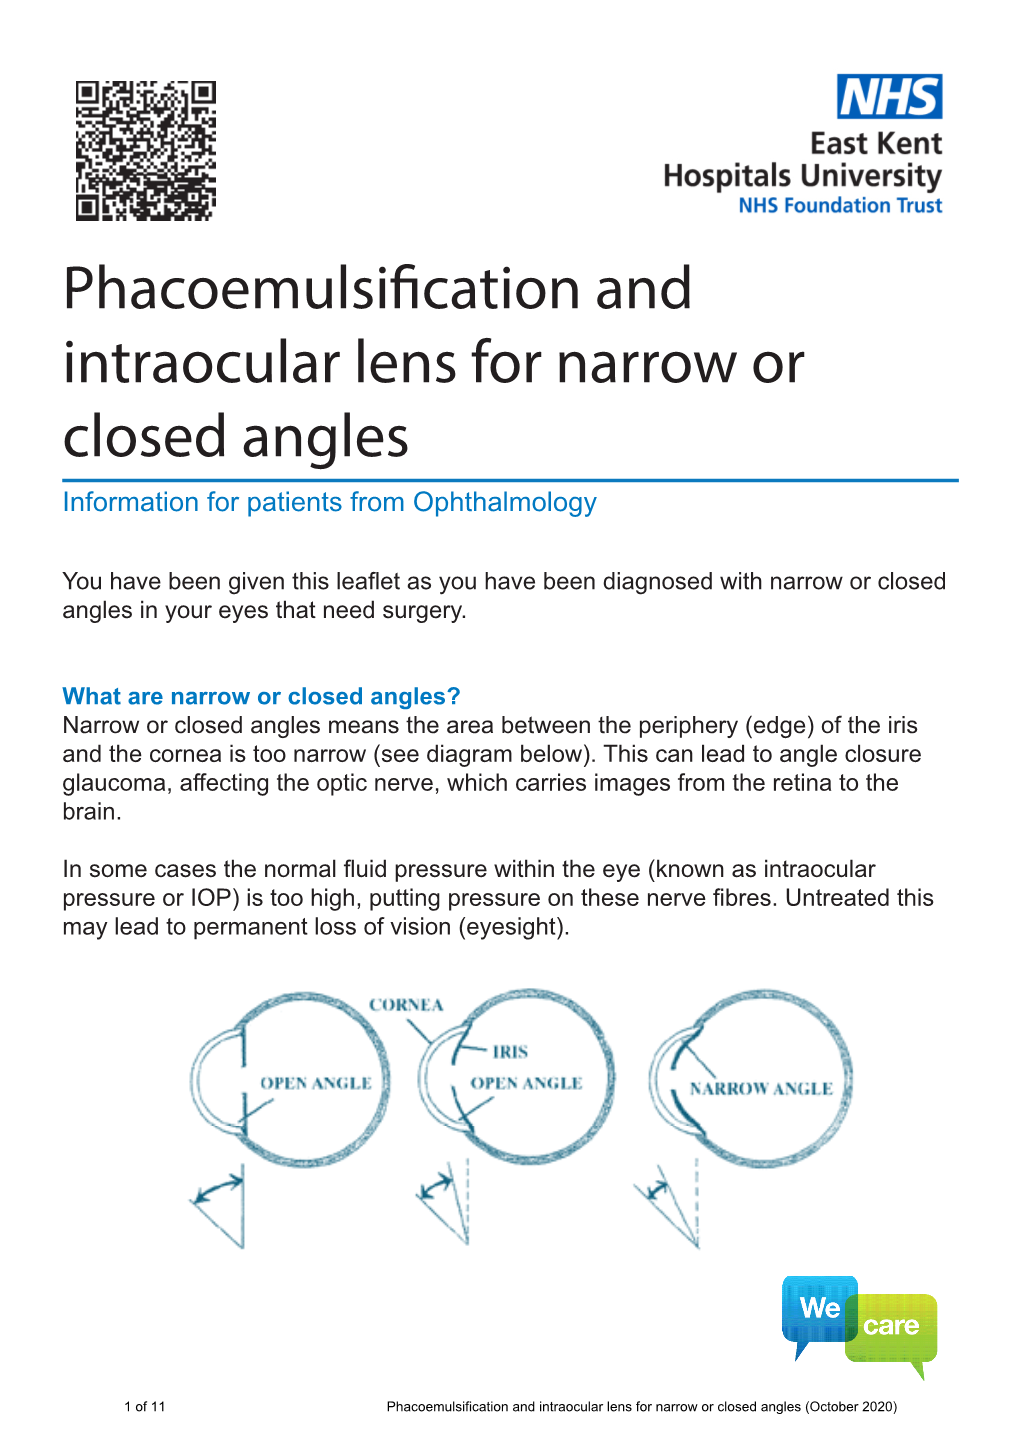 Phacoemulsification and Intraocular Lens for Narrow Or Closed Angles Information for Patients from Ophthalmology